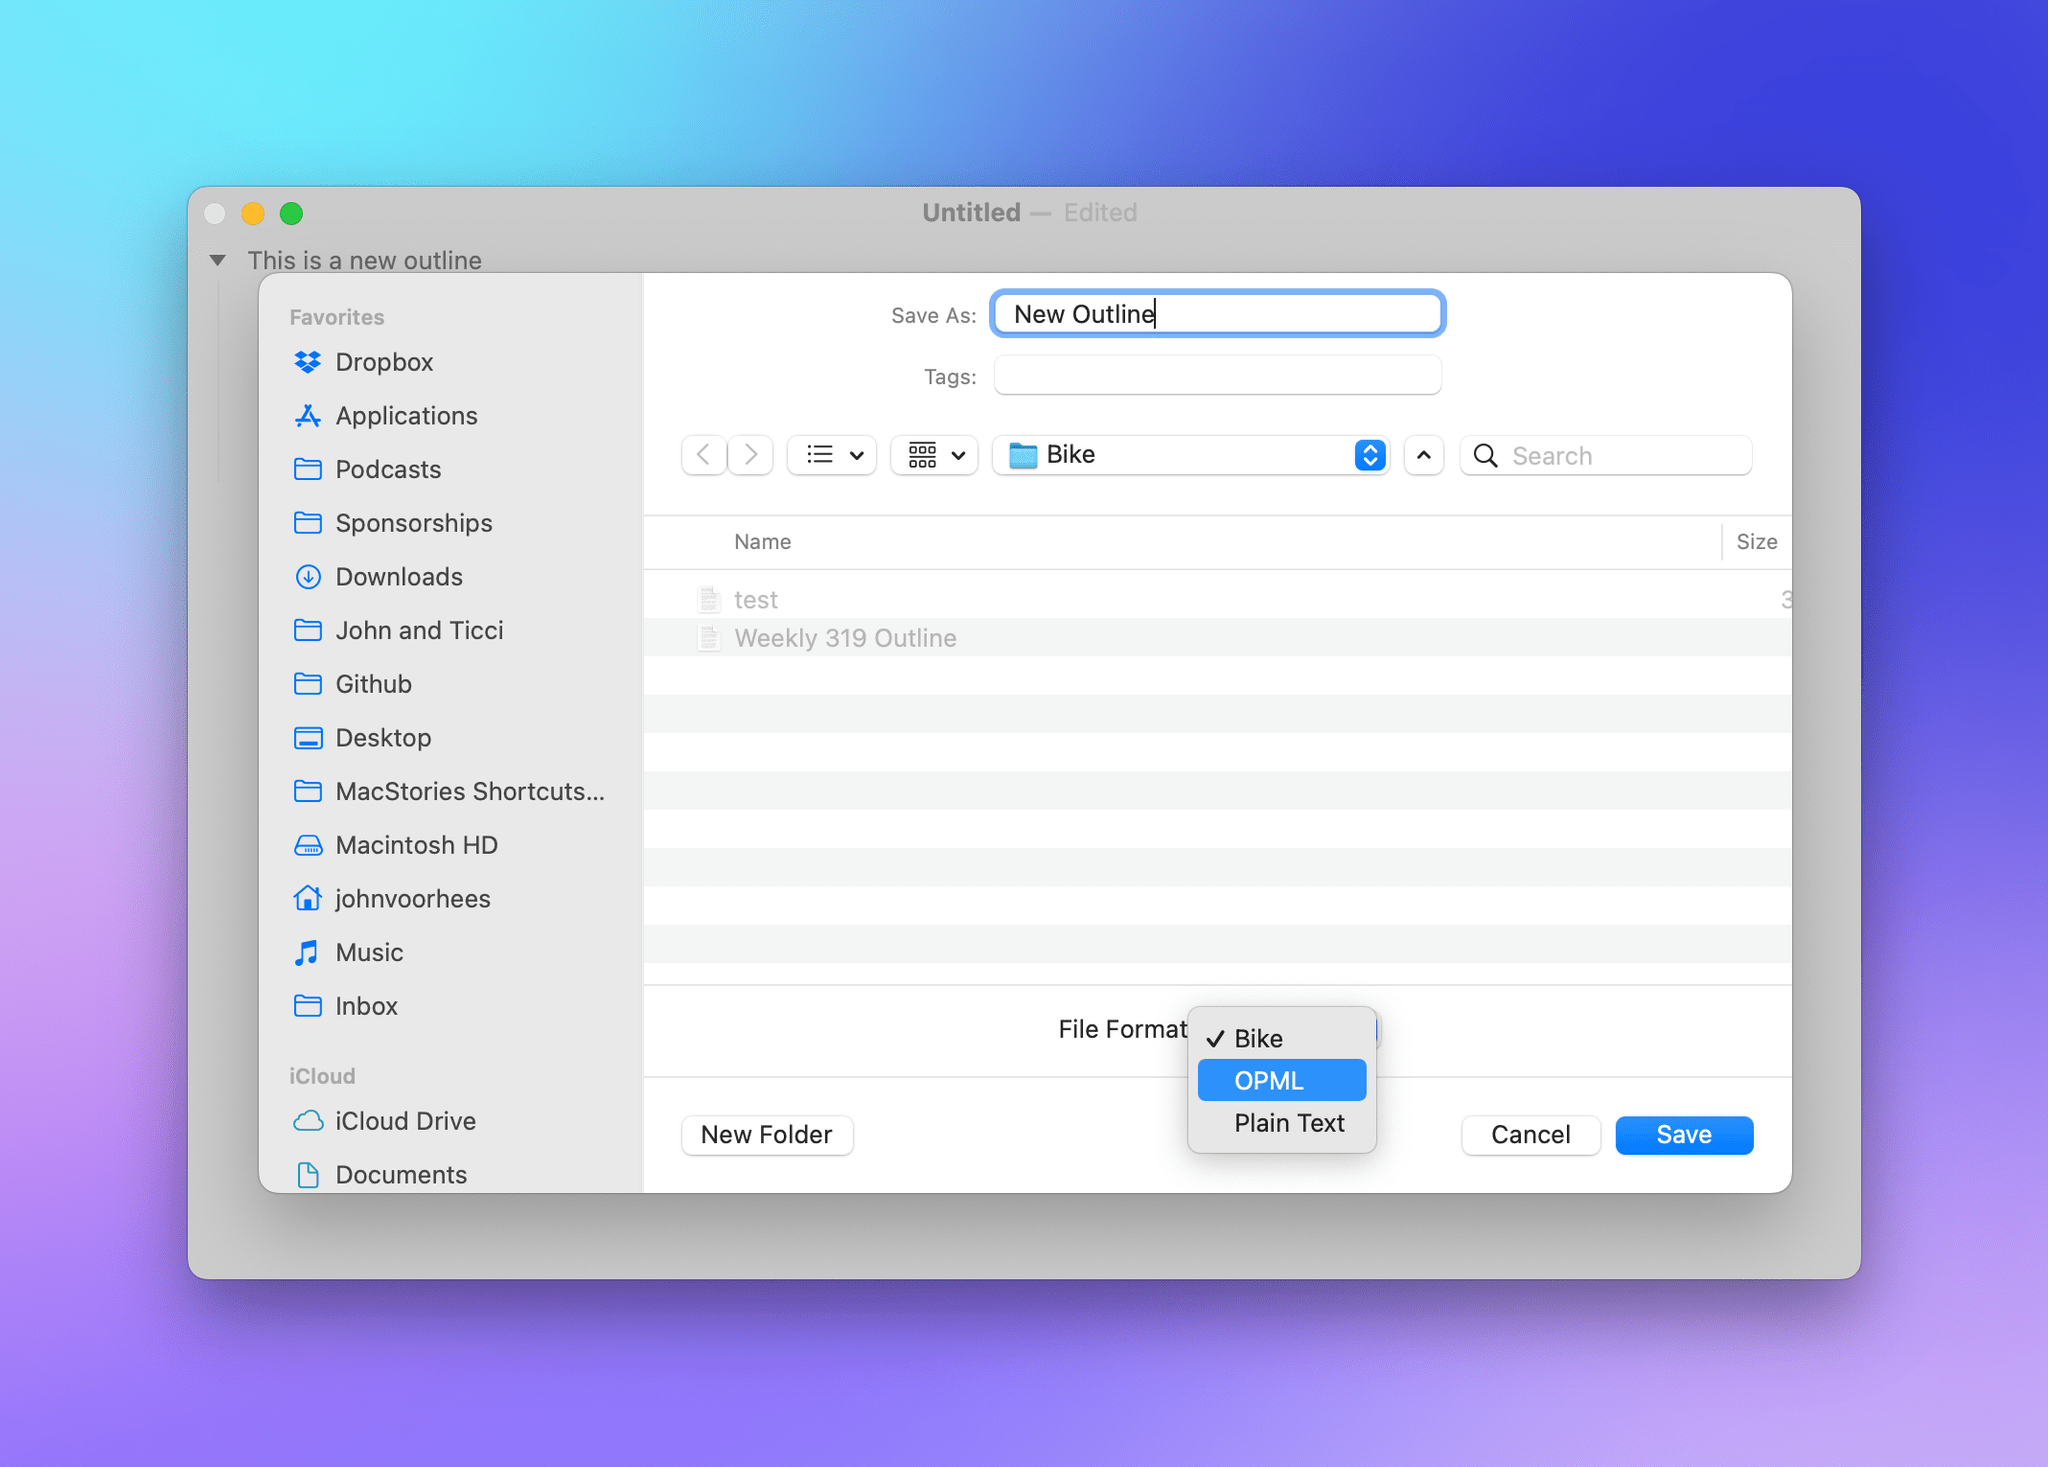 The file format for your outline is only available in the initial Save dialog.